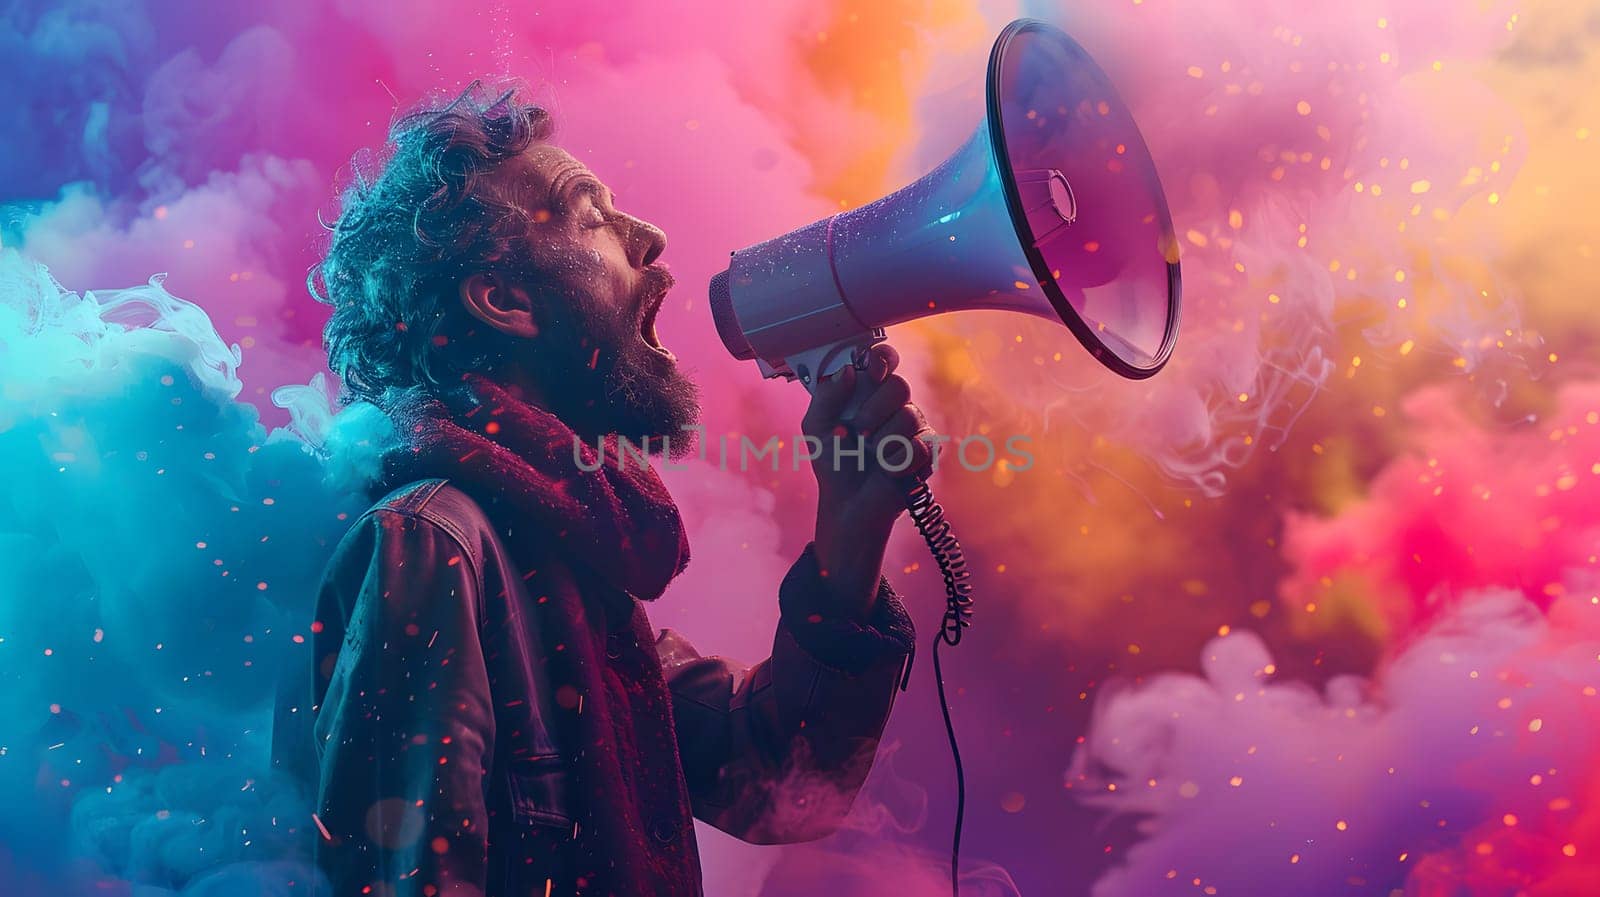 A music artist with a beard is holding a microphone in front of a colorful purple background, ready to entertain the audience at a vibrant concert